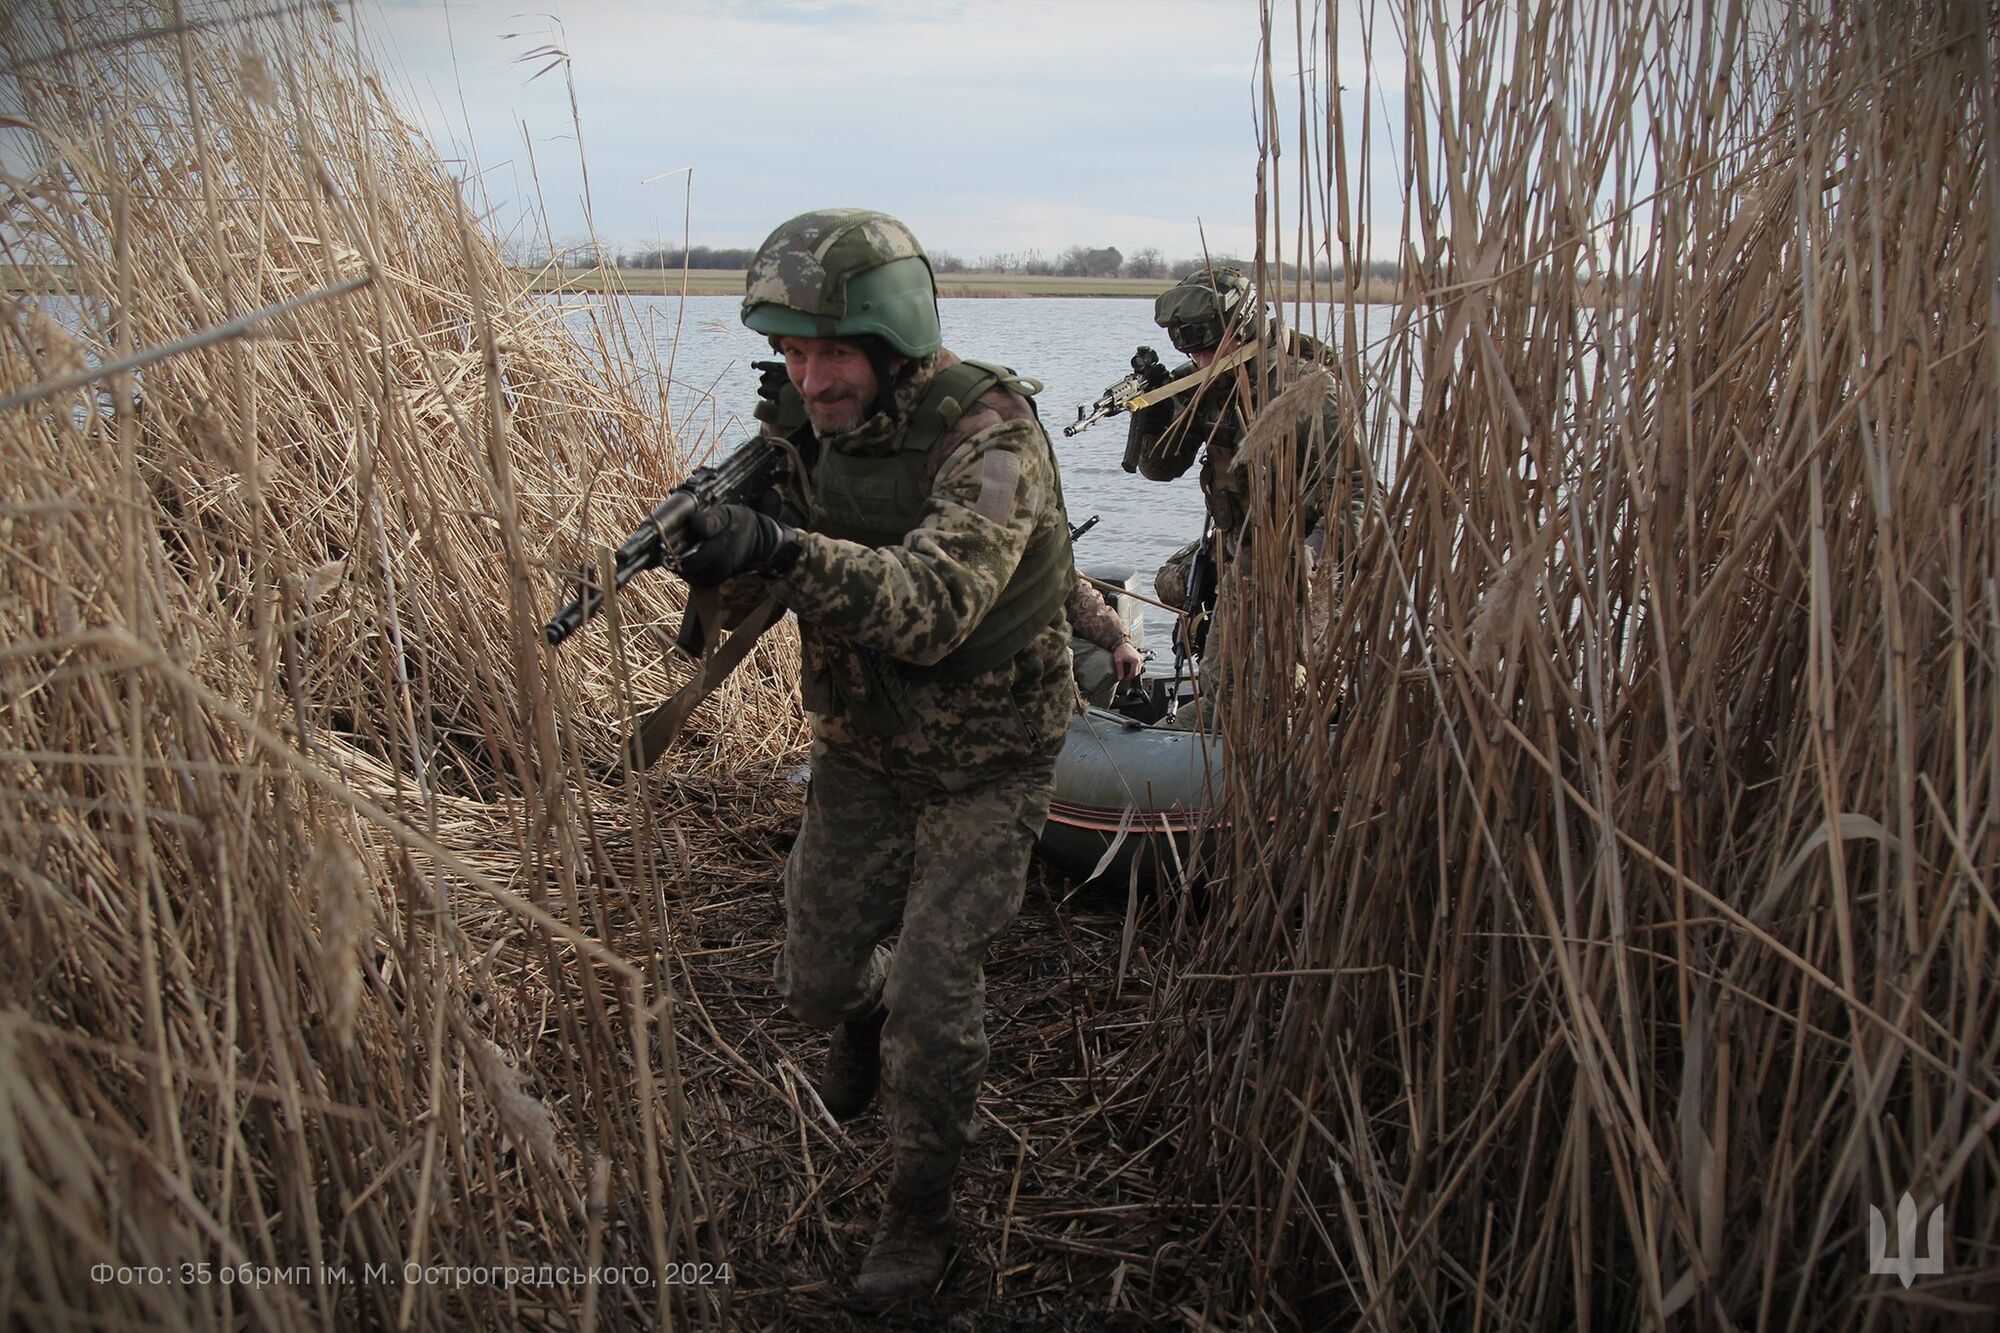 The more training, the better the results: the Armed Forces of Ukraine showed how marines are trained. Photo